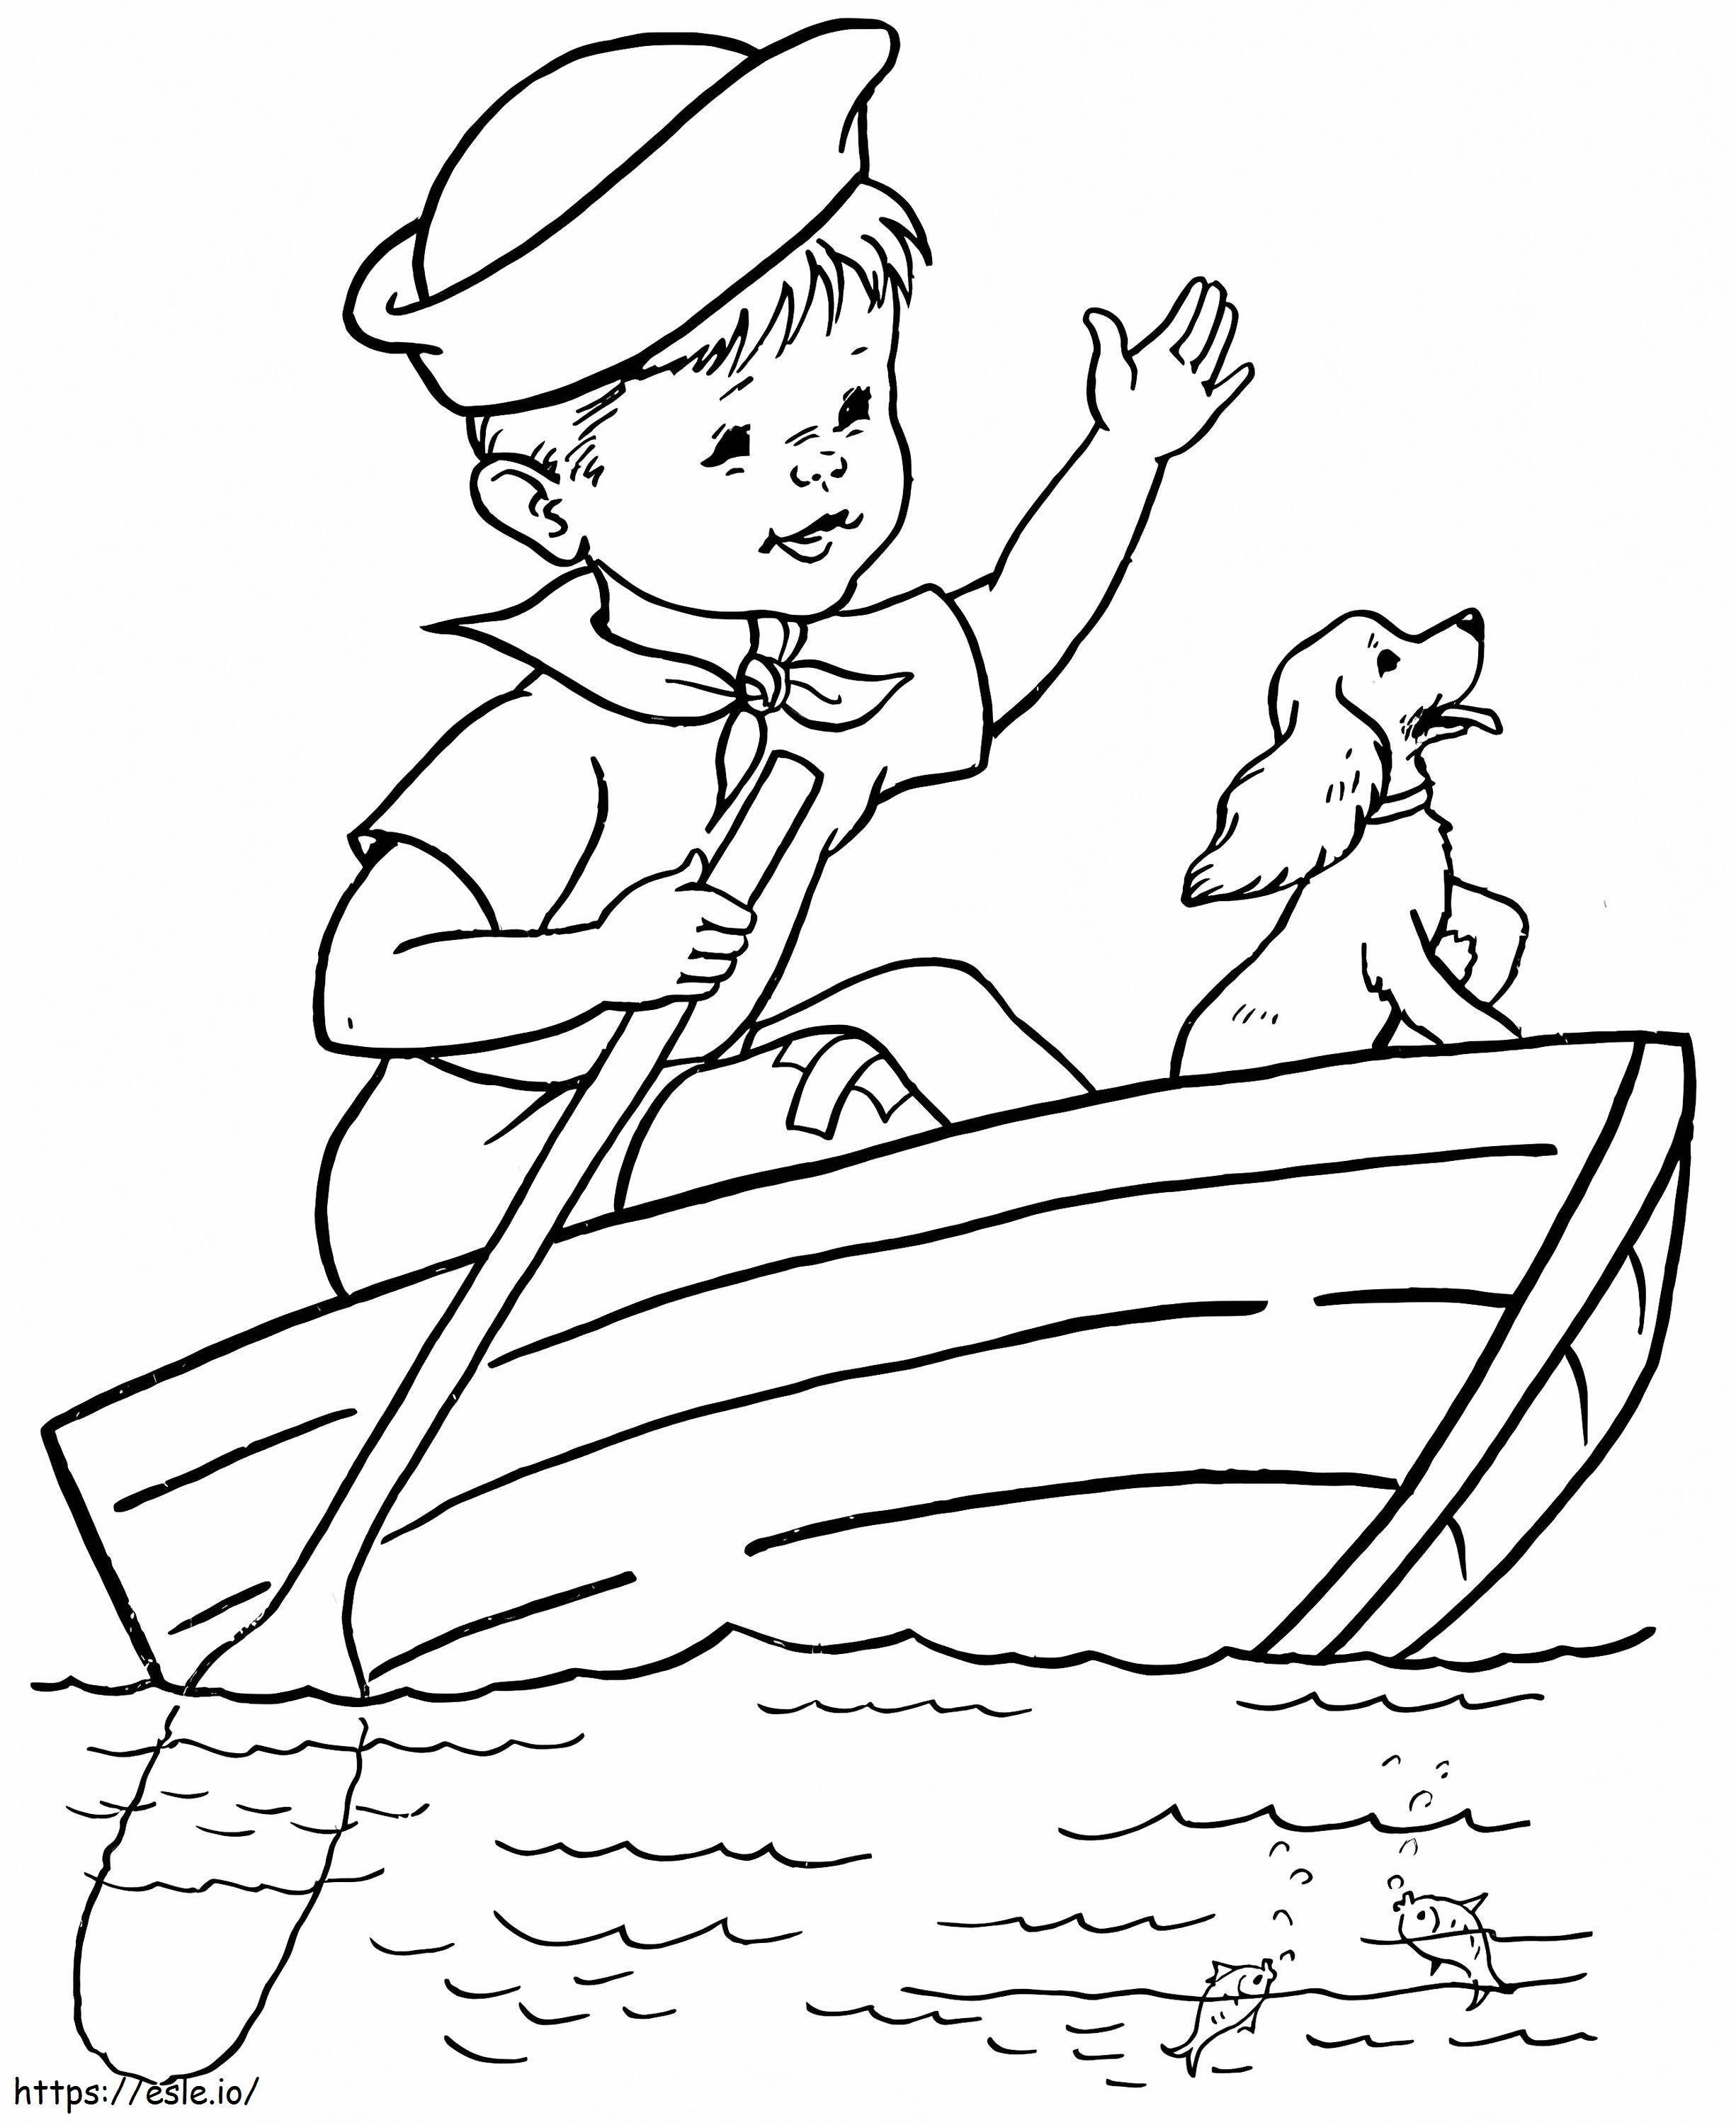 Dog Boy In Rowboat coloring page